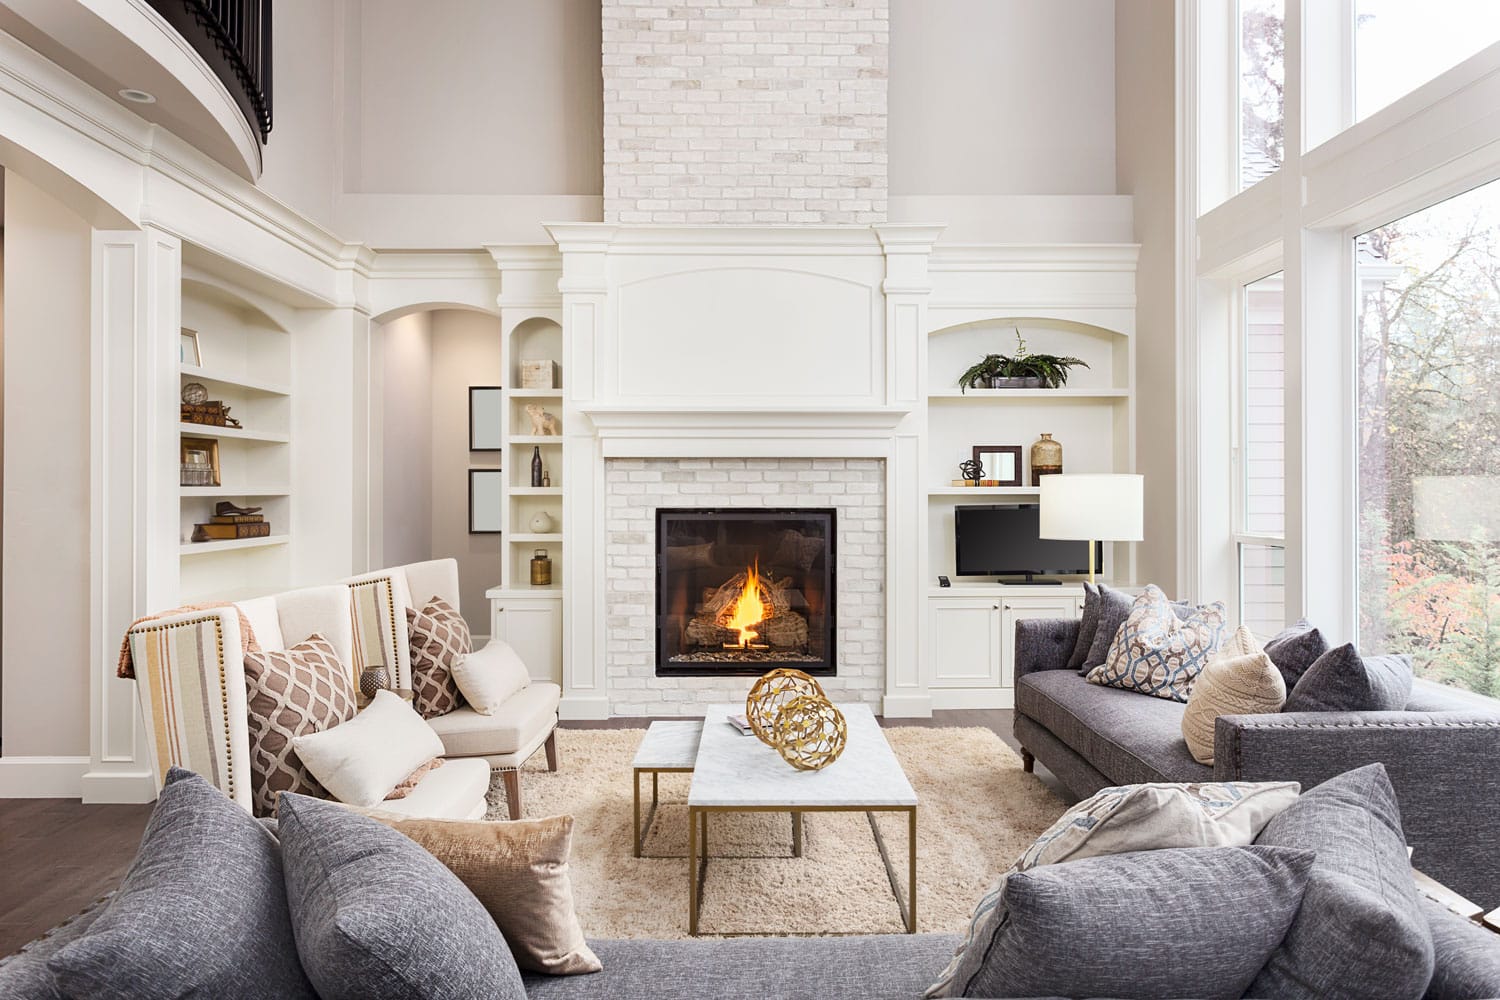 Gorgeous simple living room interior with fireplace